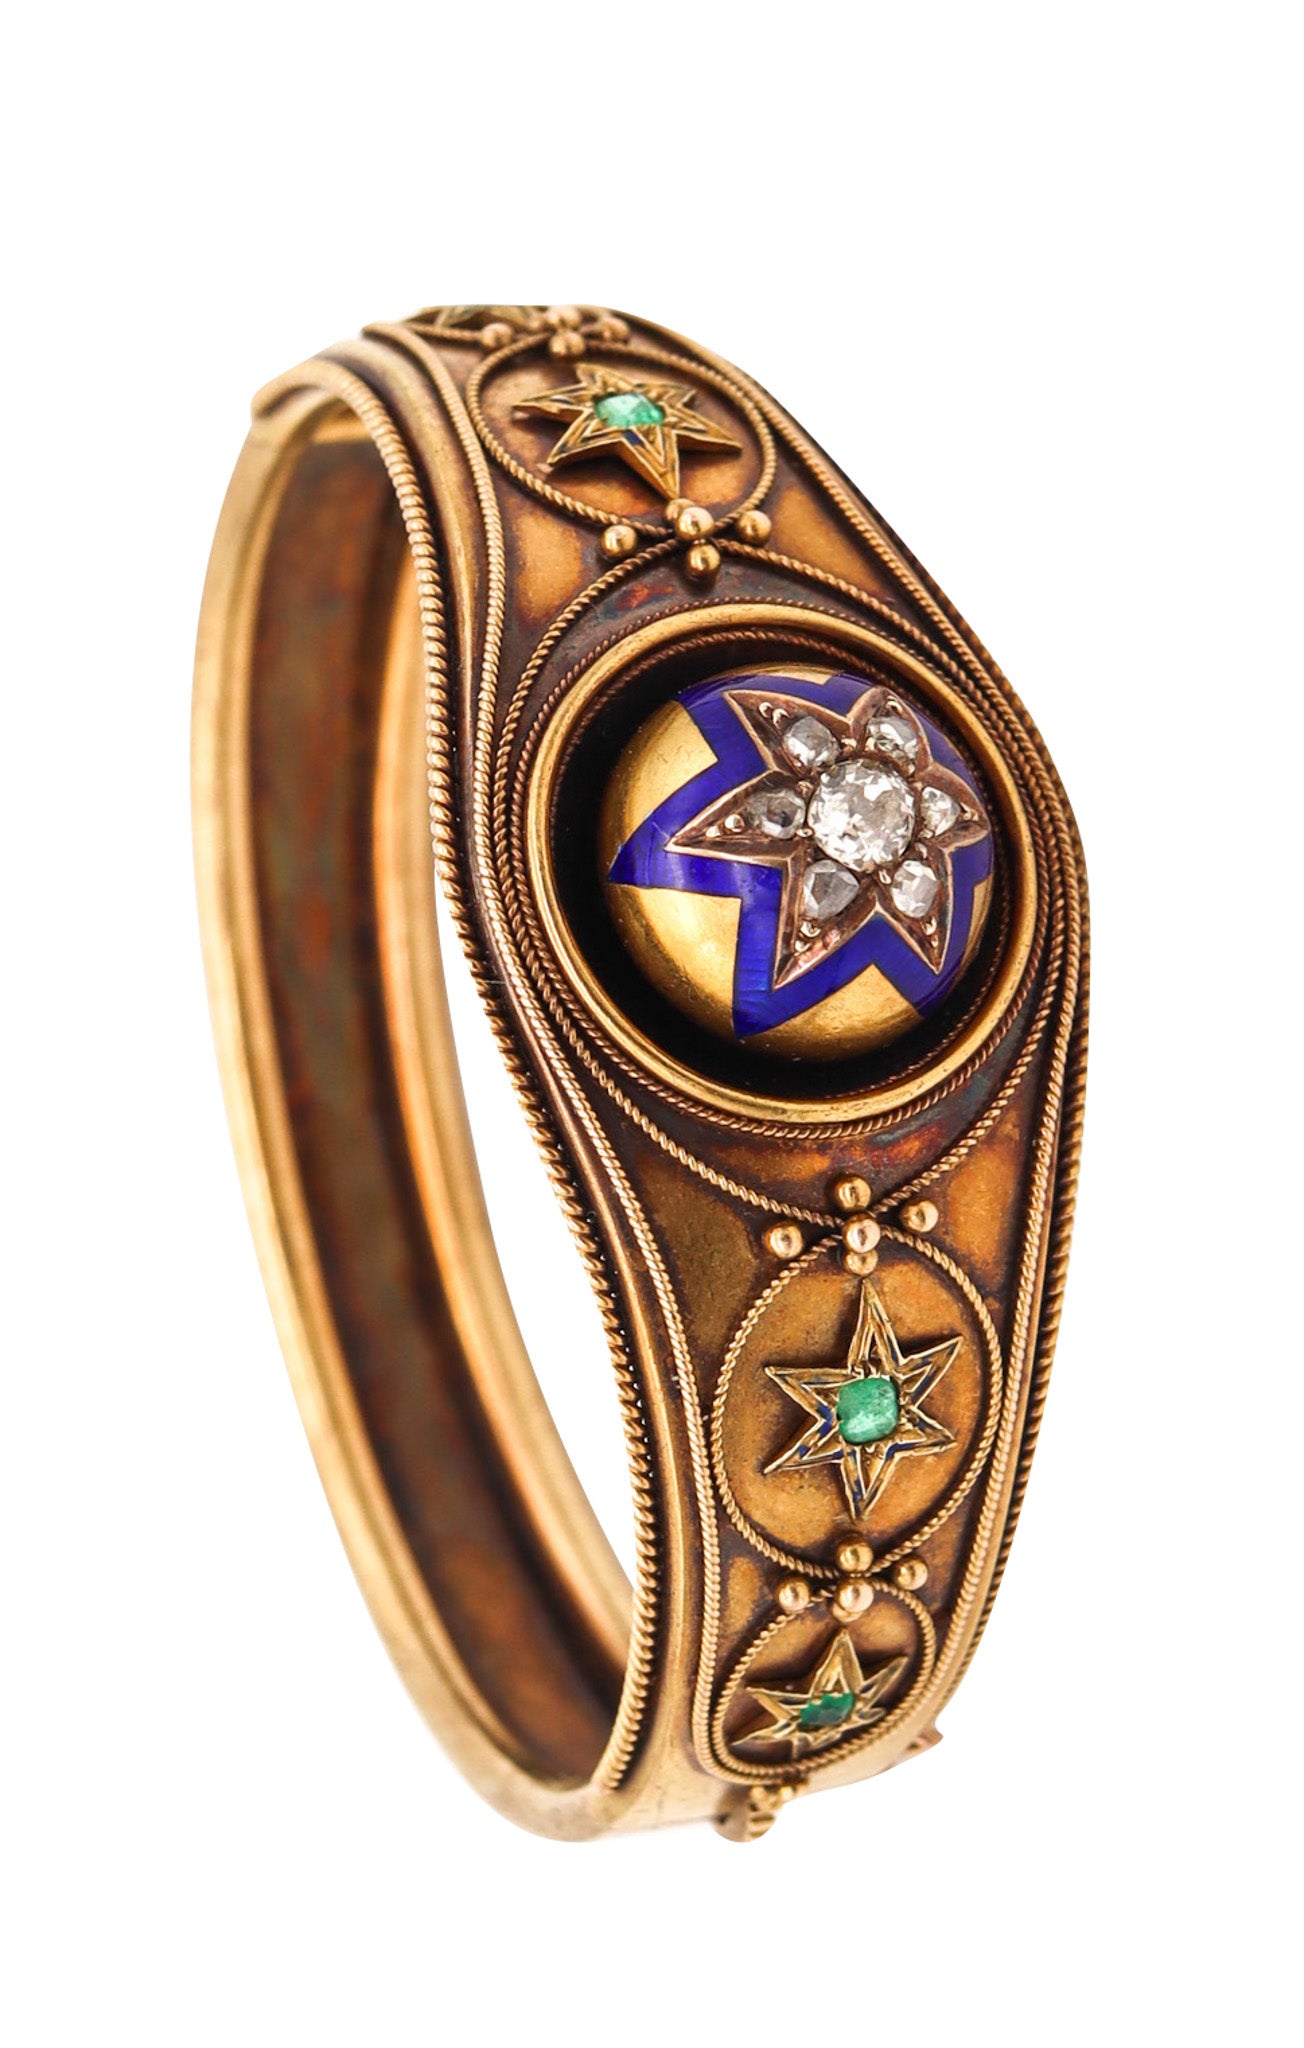 -Victorian 1870 Etruscan Revival Enamel Star Bracelet In 15Kt Gold With Diamonds And Emeralds